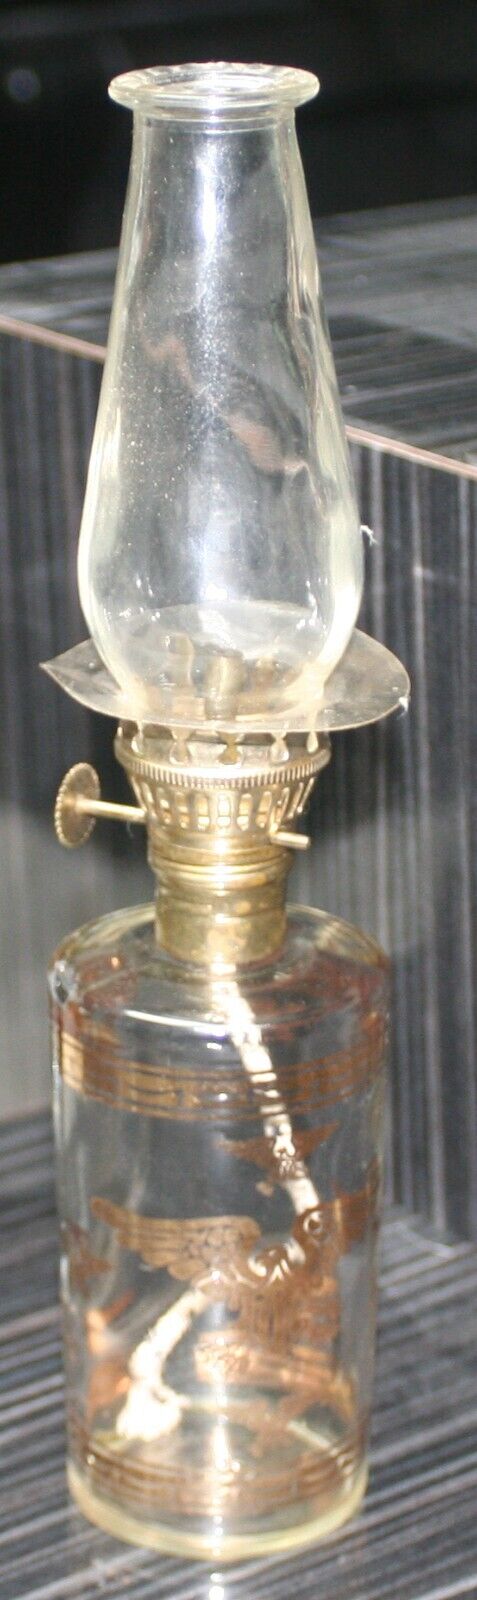 VINTAGE FOSTER FORBES GLASS HURRICANE OIL LAMP GOLD AMERICAN EAGLE SHIELD